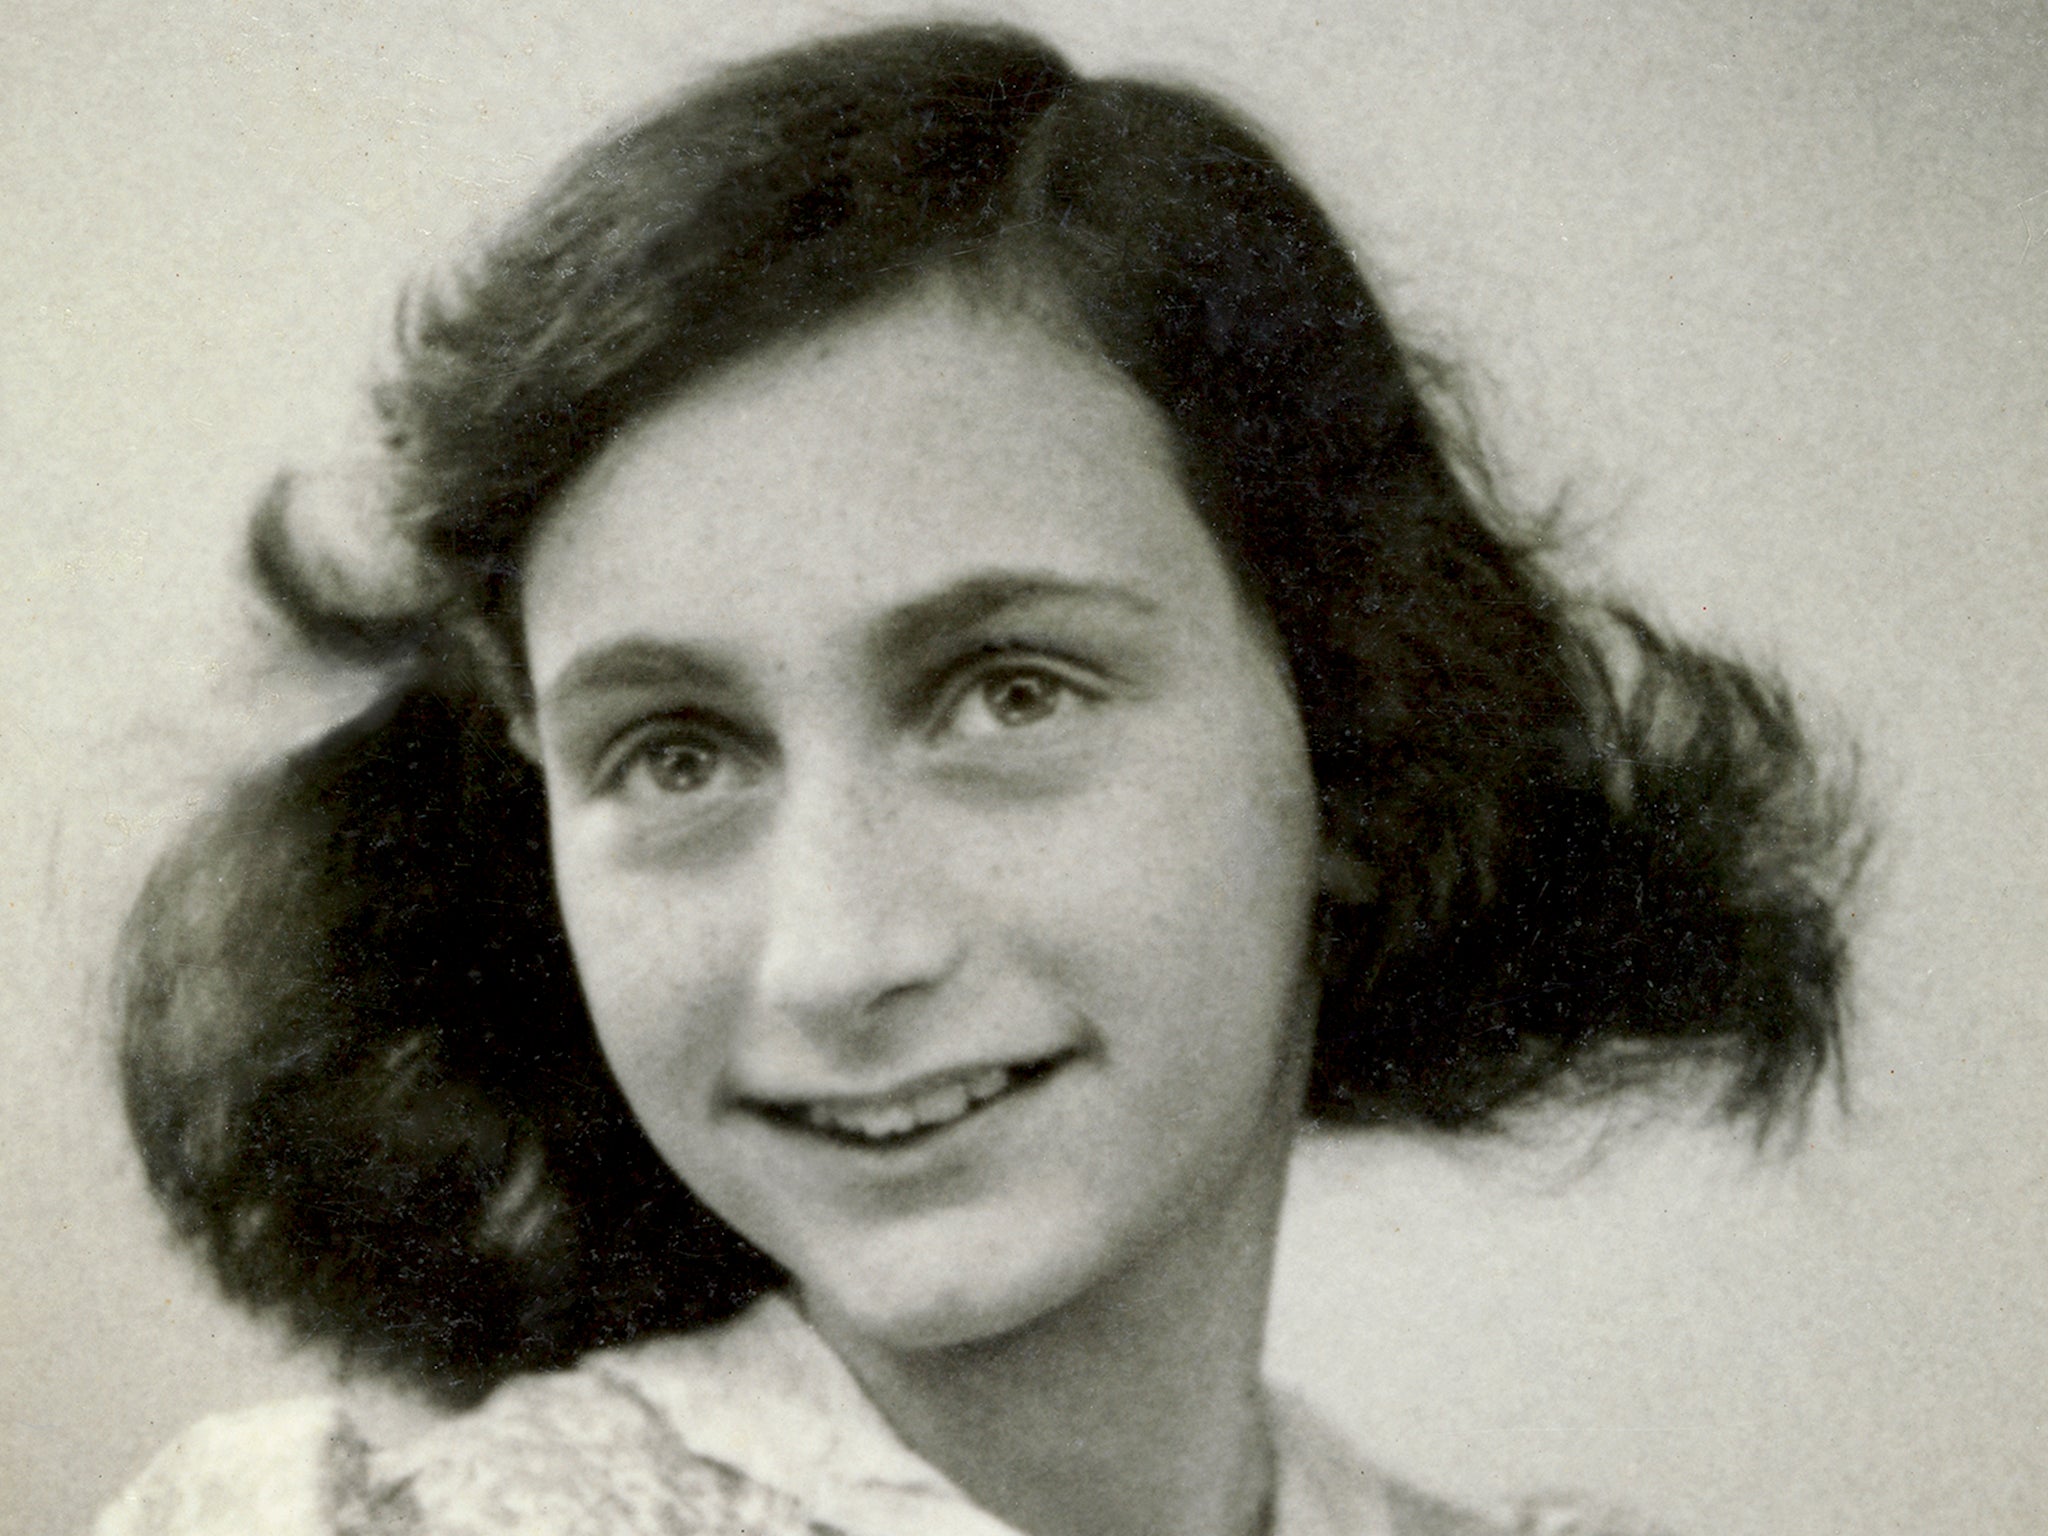 In 1933, Anne Frank’s family fled Germany for Amsterdam